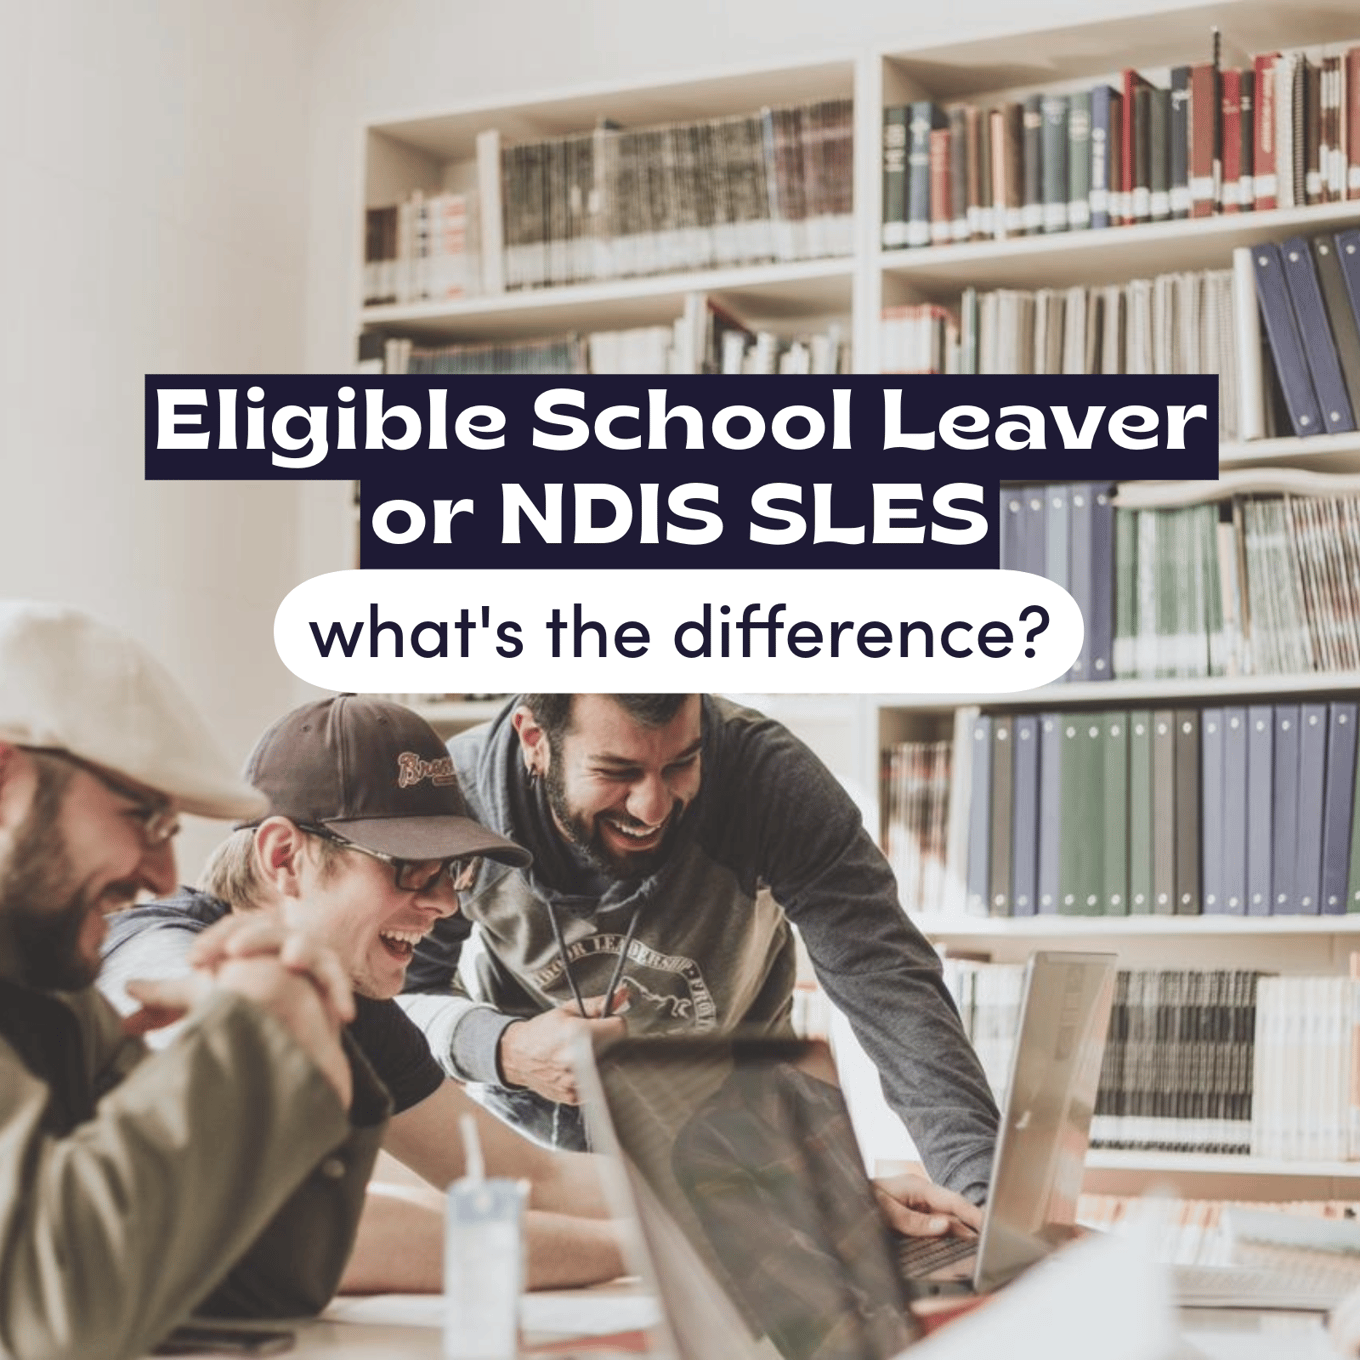 What's the difference between Eligible School Leavers and NDIS SLES?